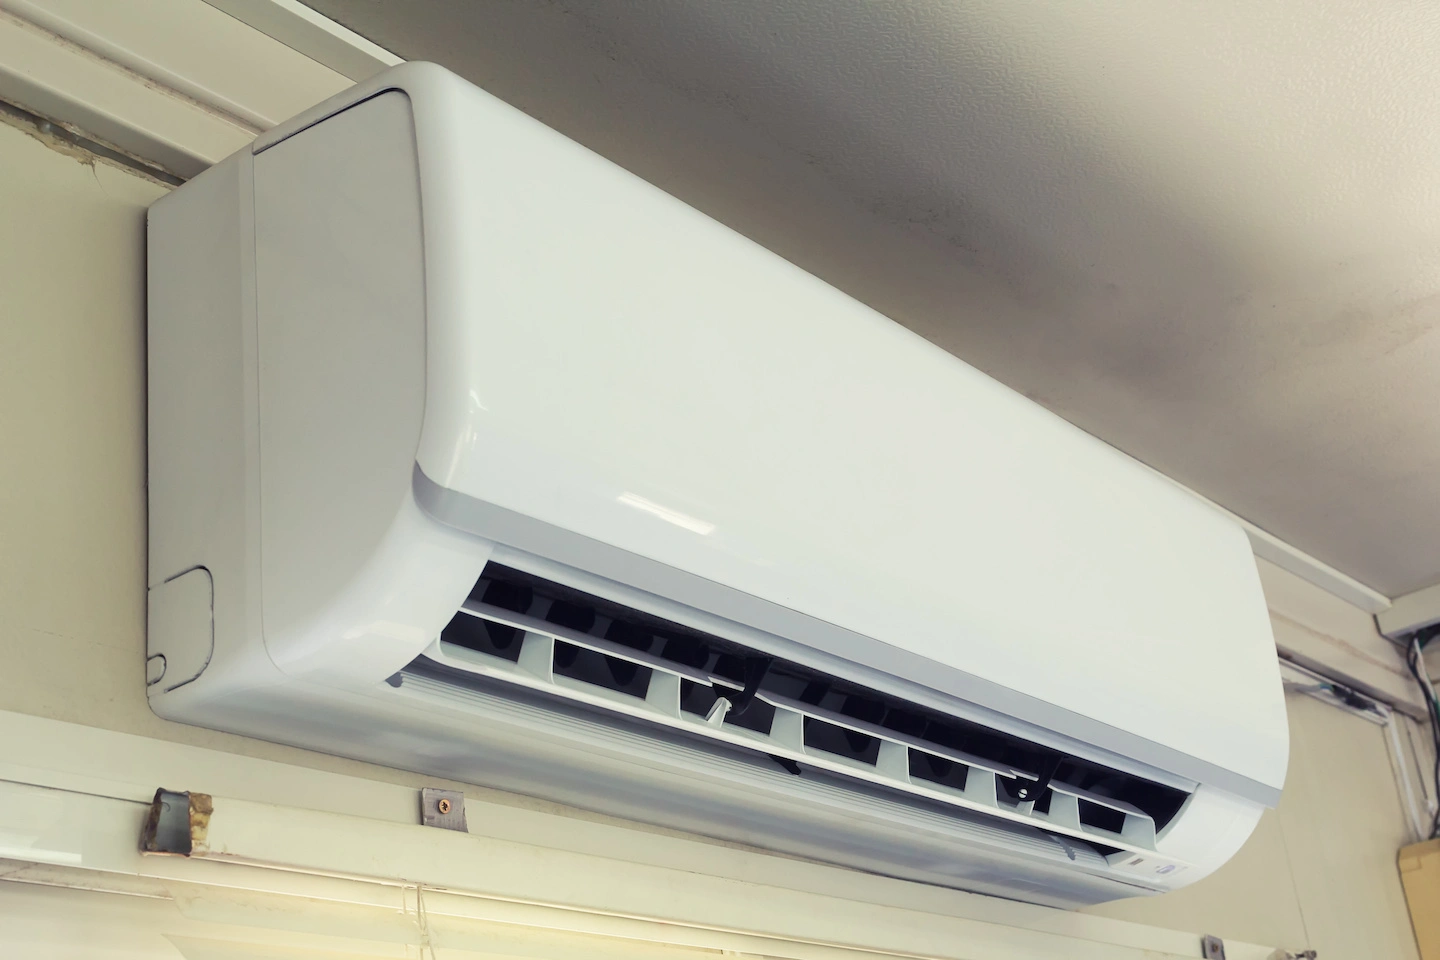 Mini split air conditioning system inside home located in Lafayette, Louisiana.
